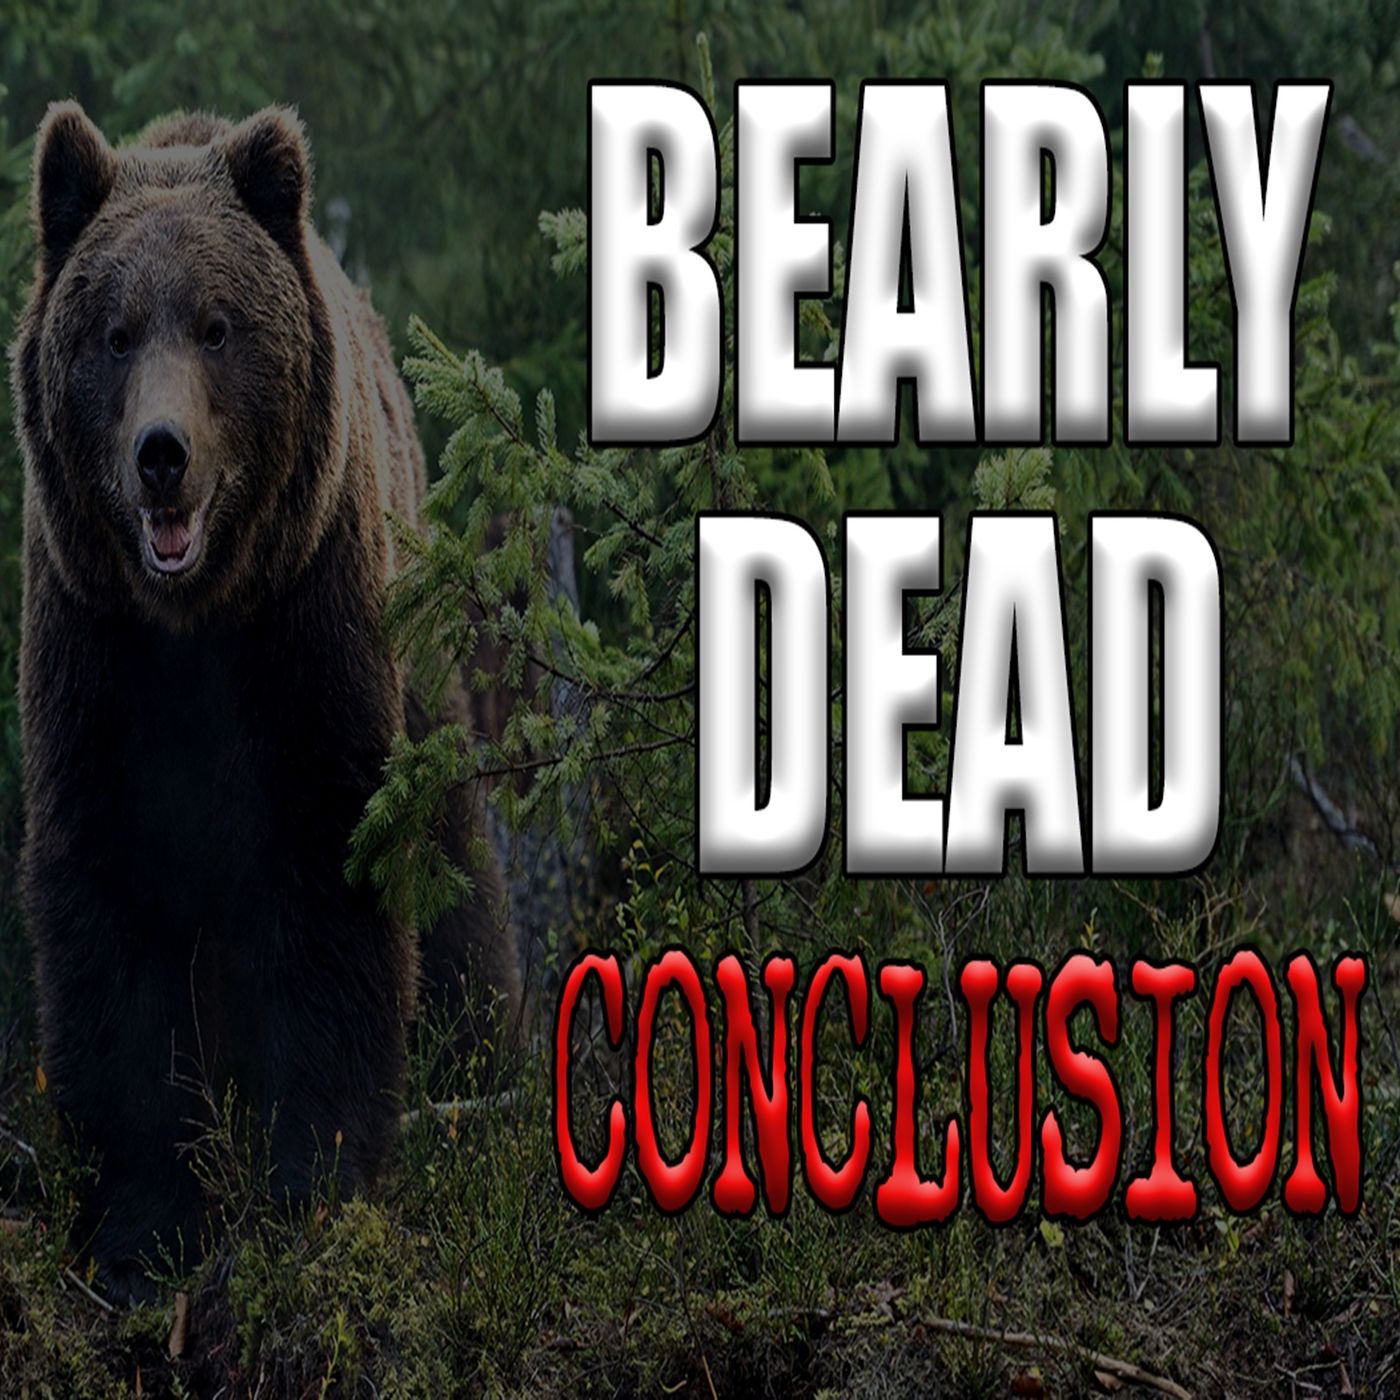 Bearly Dead The Conclusion